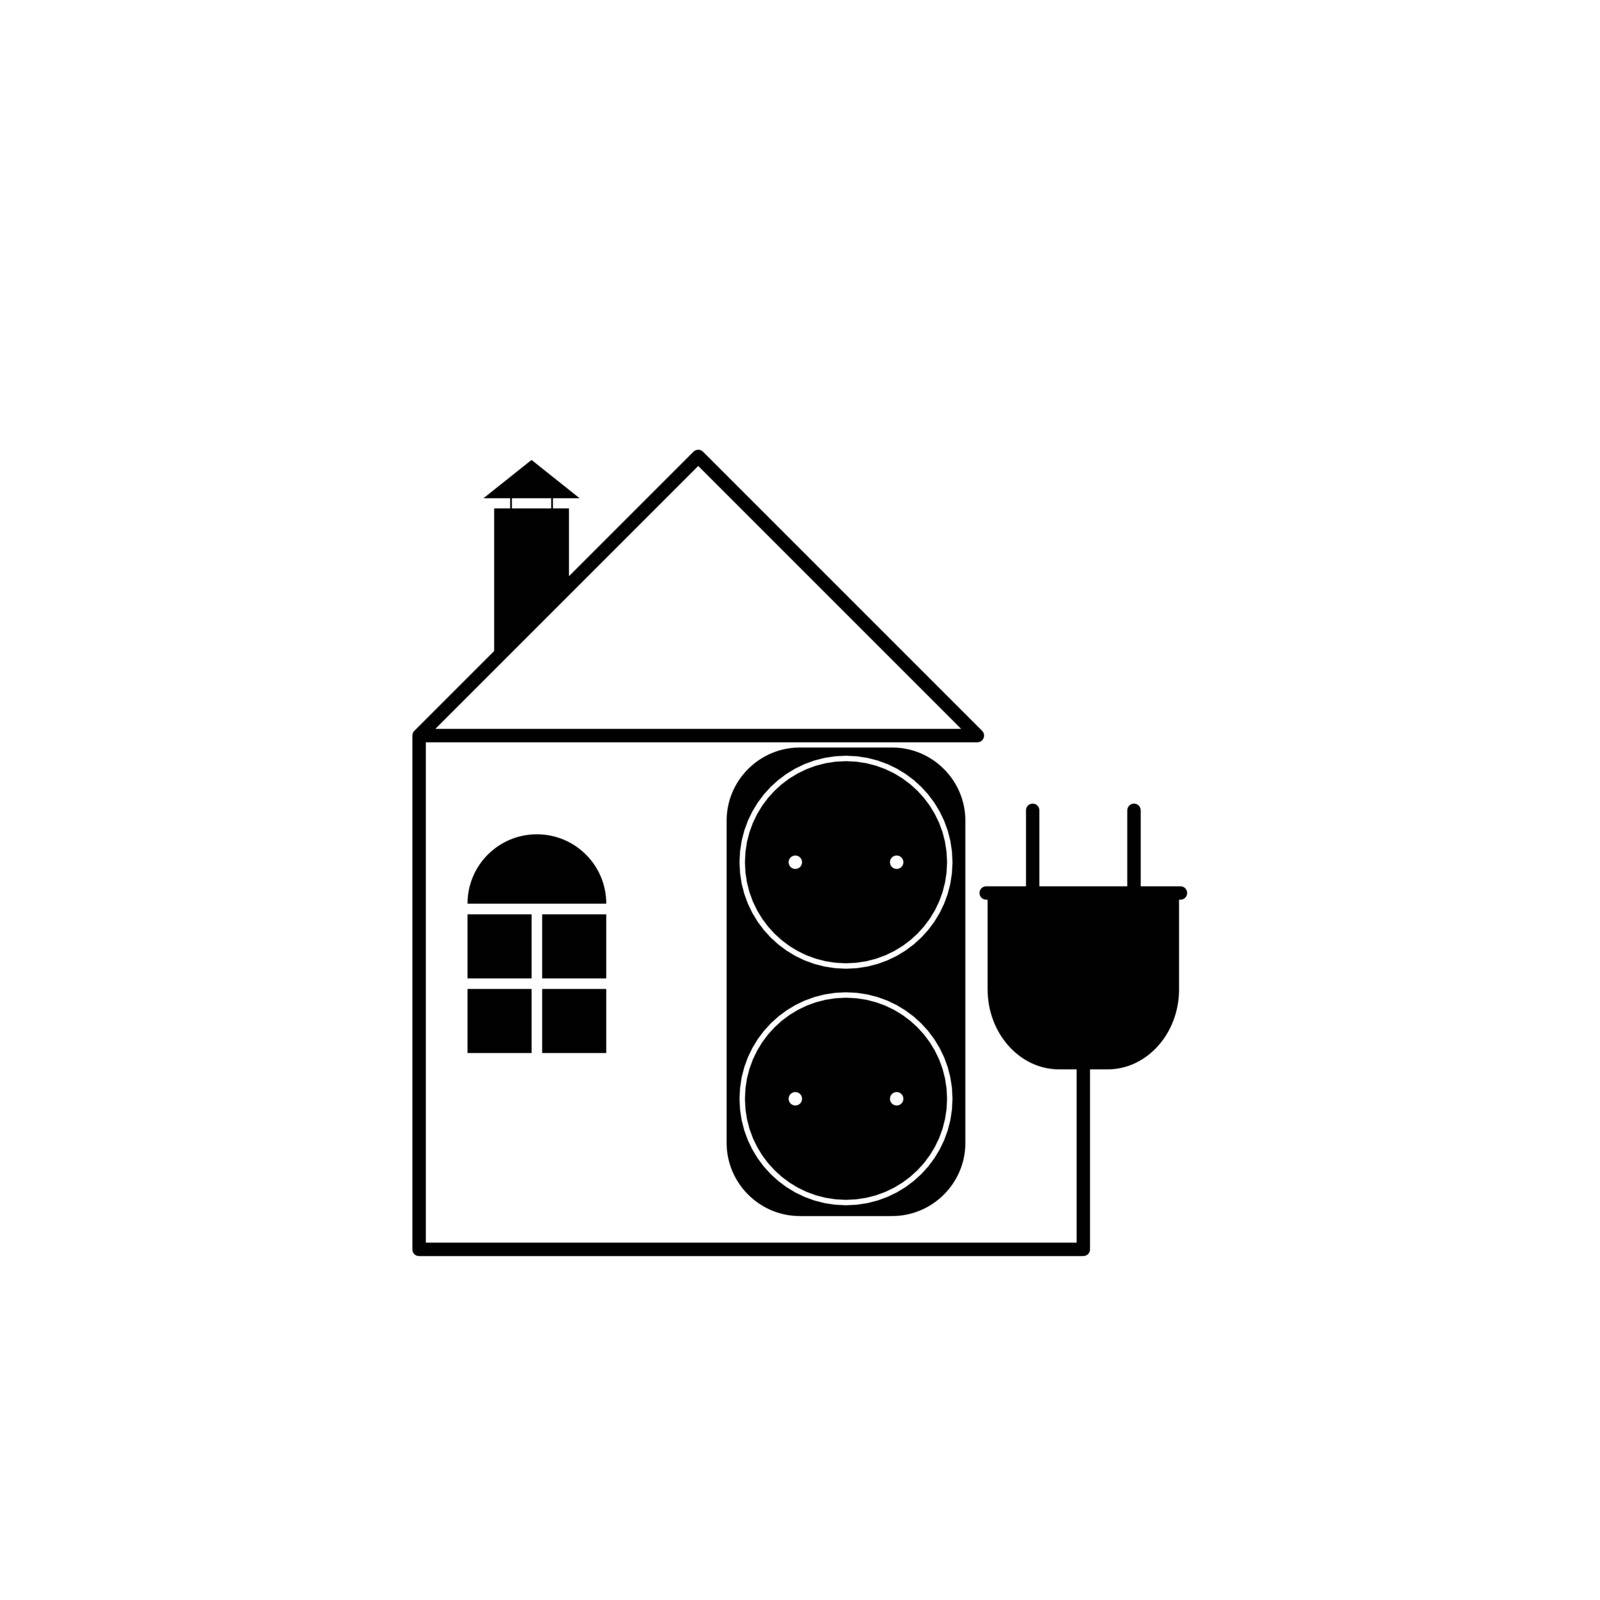 Flat image with the image of a house and an electrical outlet and plug